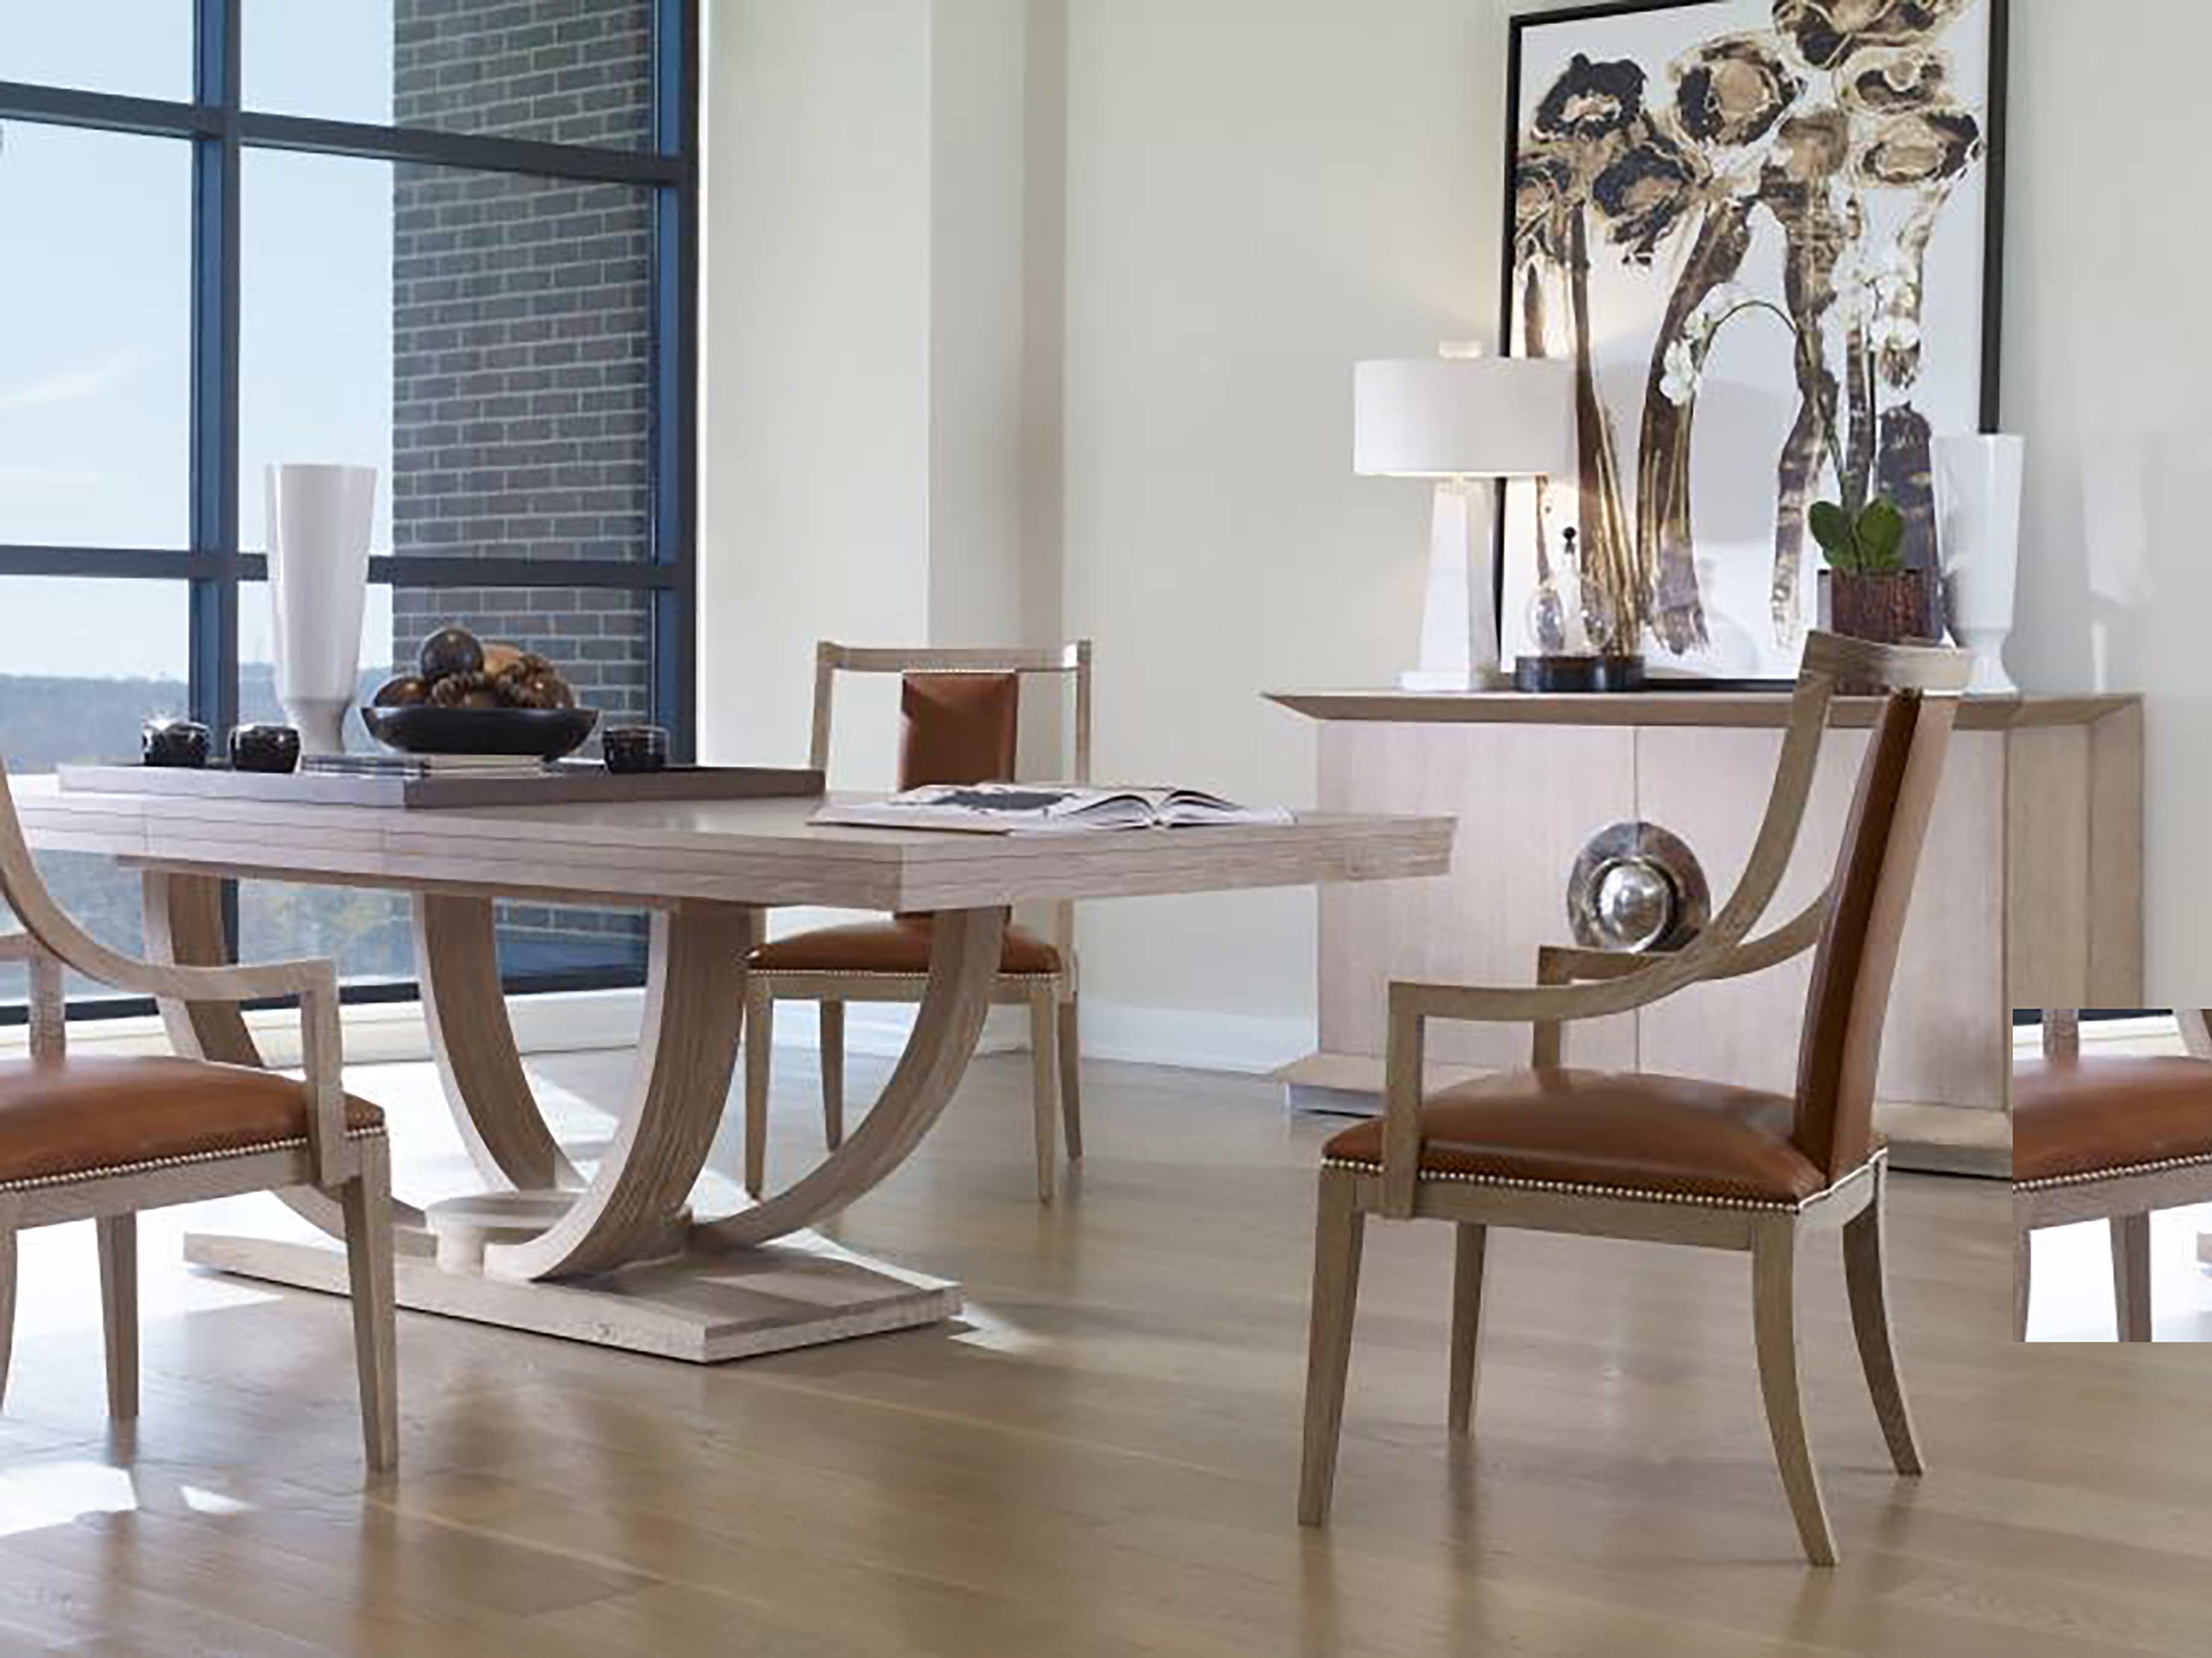 Dining Room Furniture Bozeman MT Find Dining Room Furniture Near You